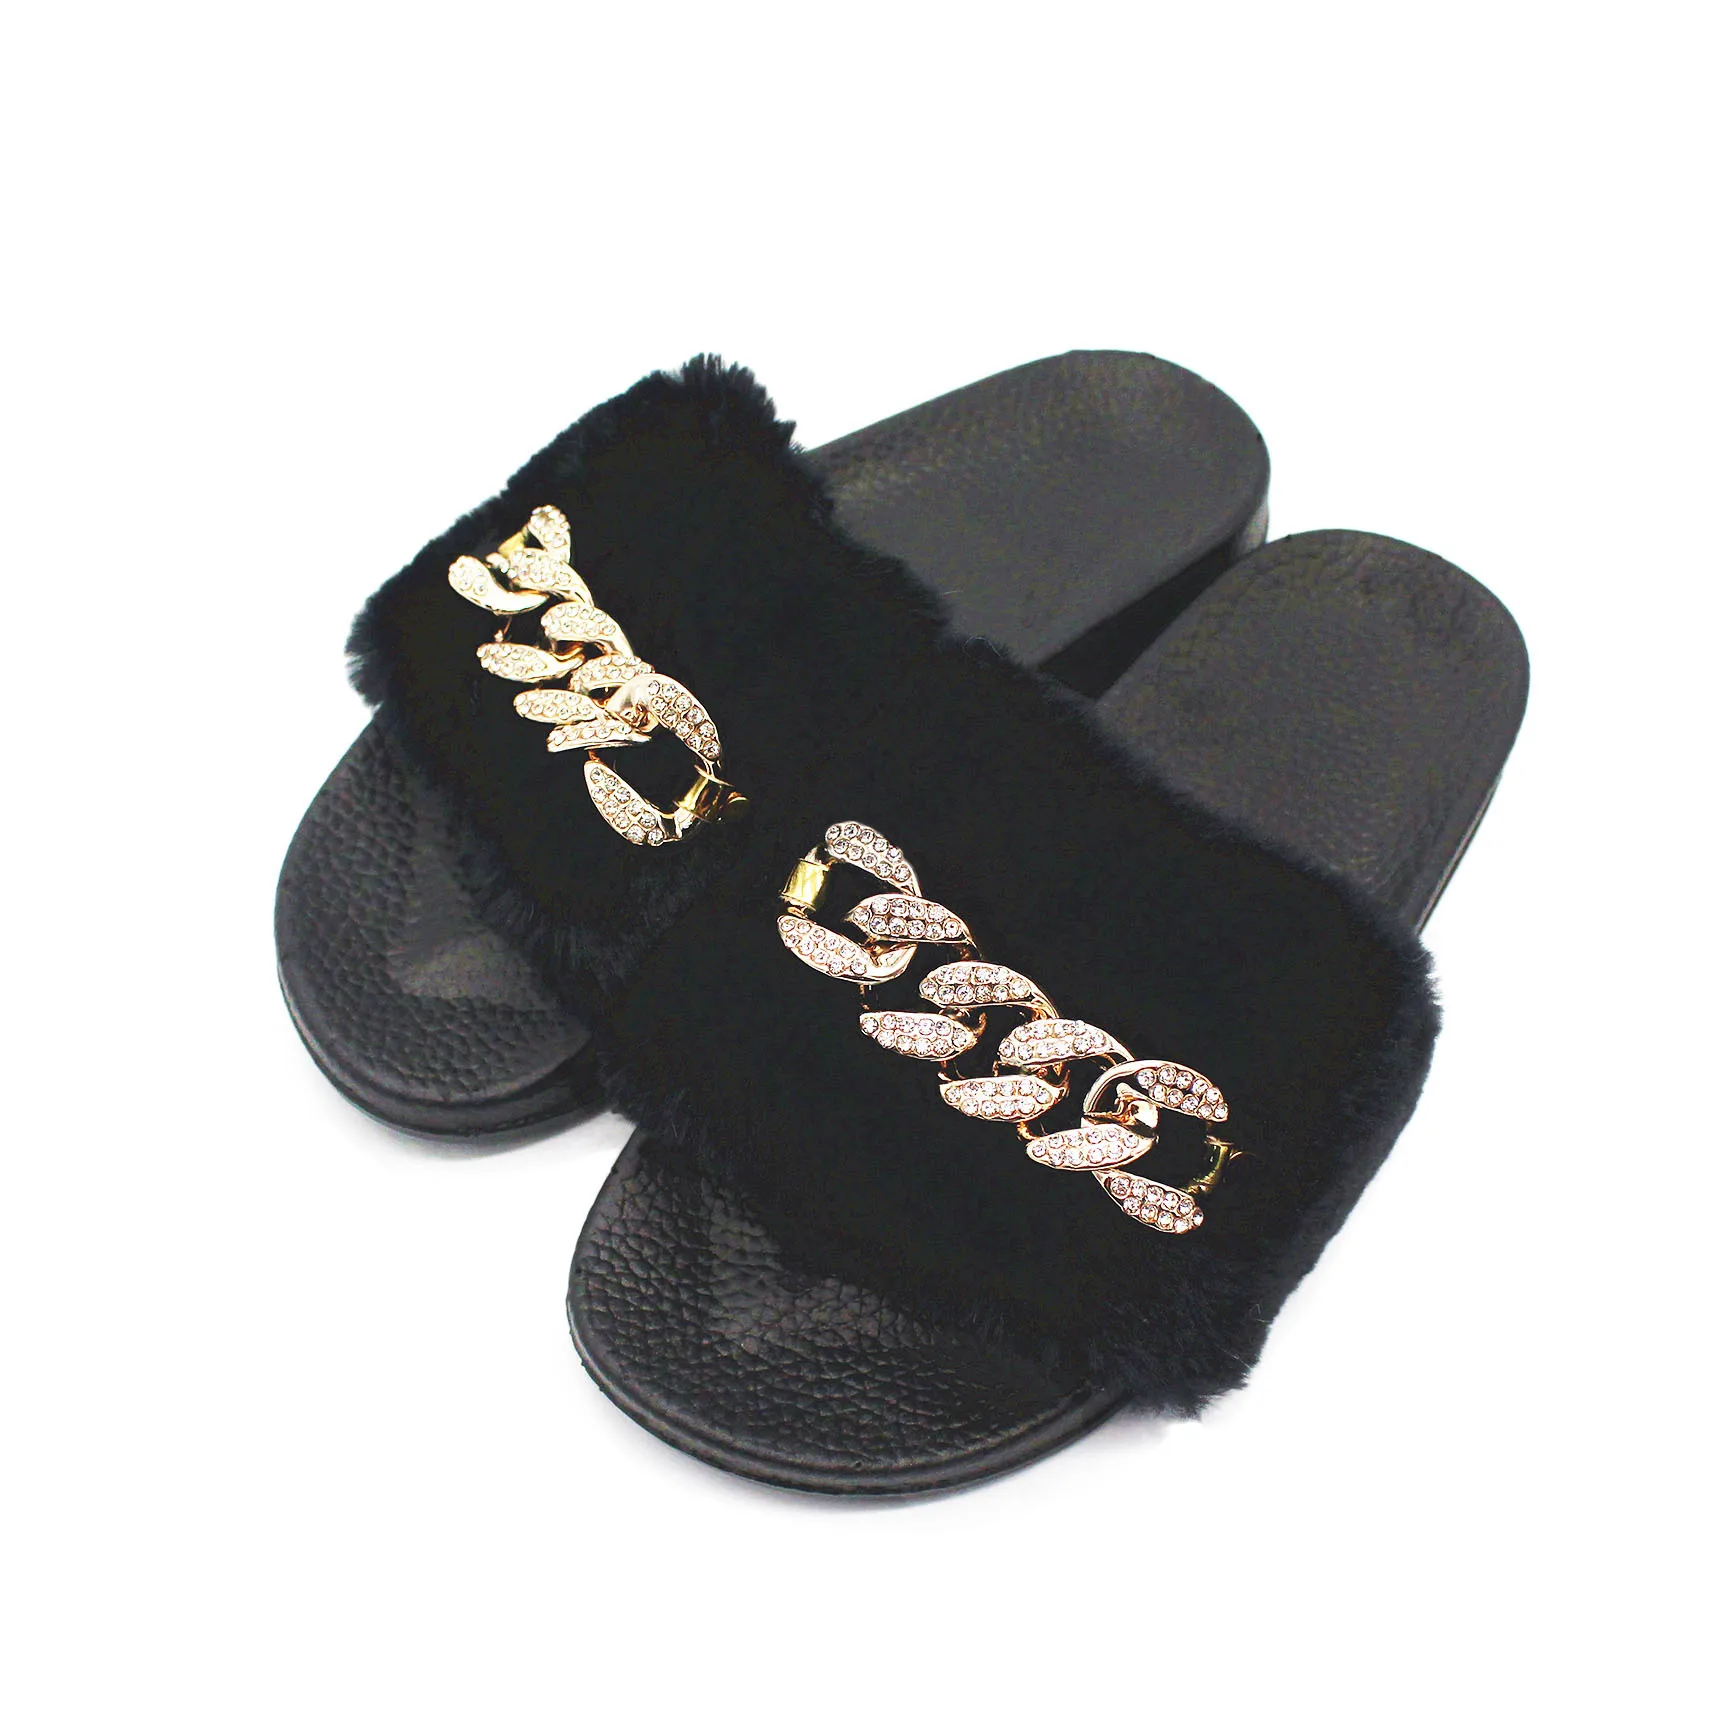 

Shangzhou OEM Pantoufles pour adultes Winter Chain Outdoor Crystal Comfortable Fluffy Slippers, Black/khaki/pink/grey